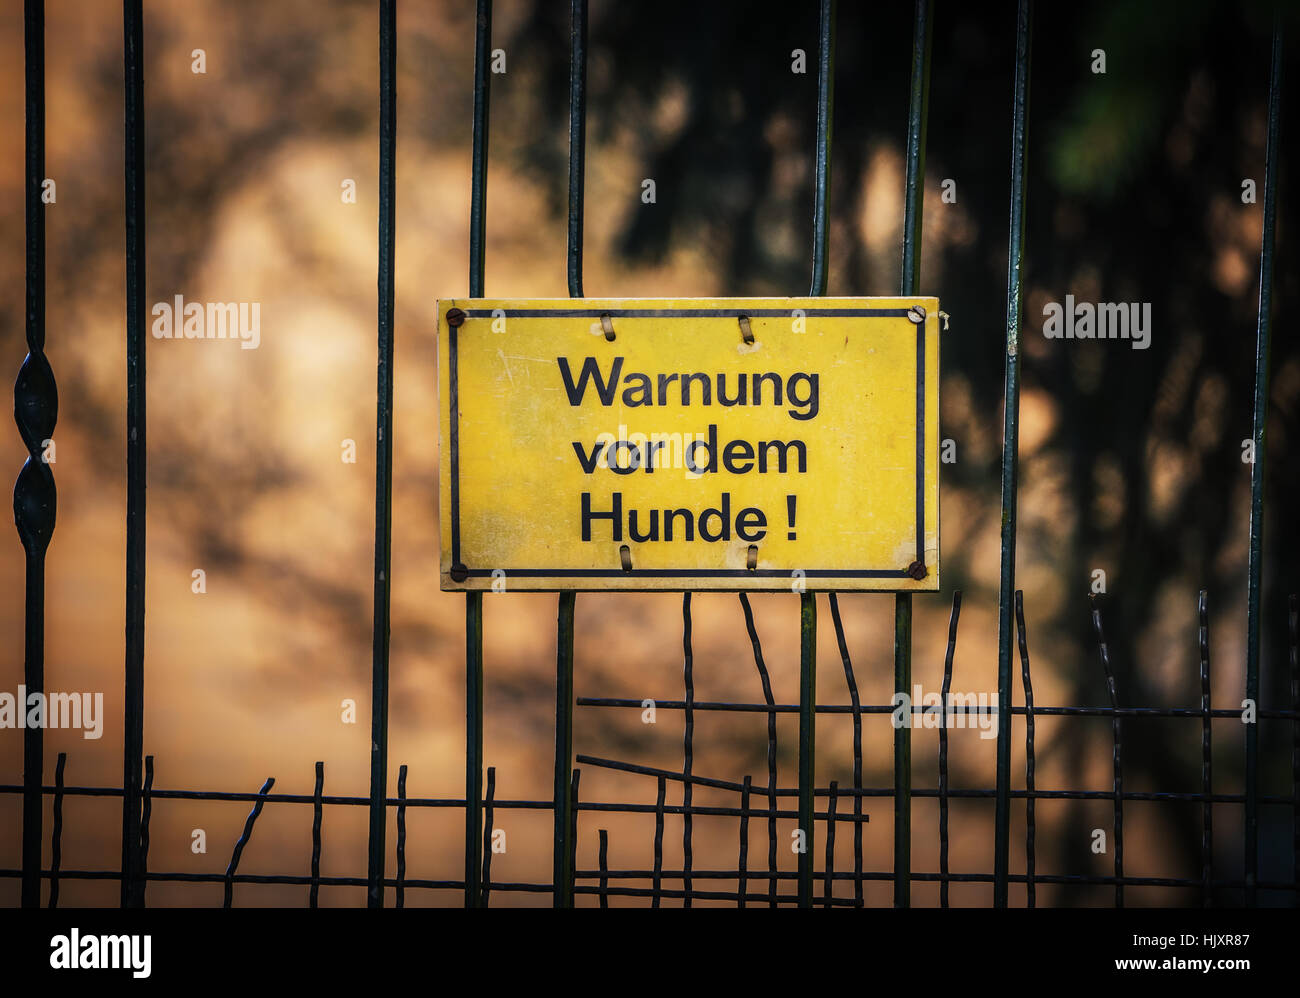 German warning sign hanging on the fence Stock Photo